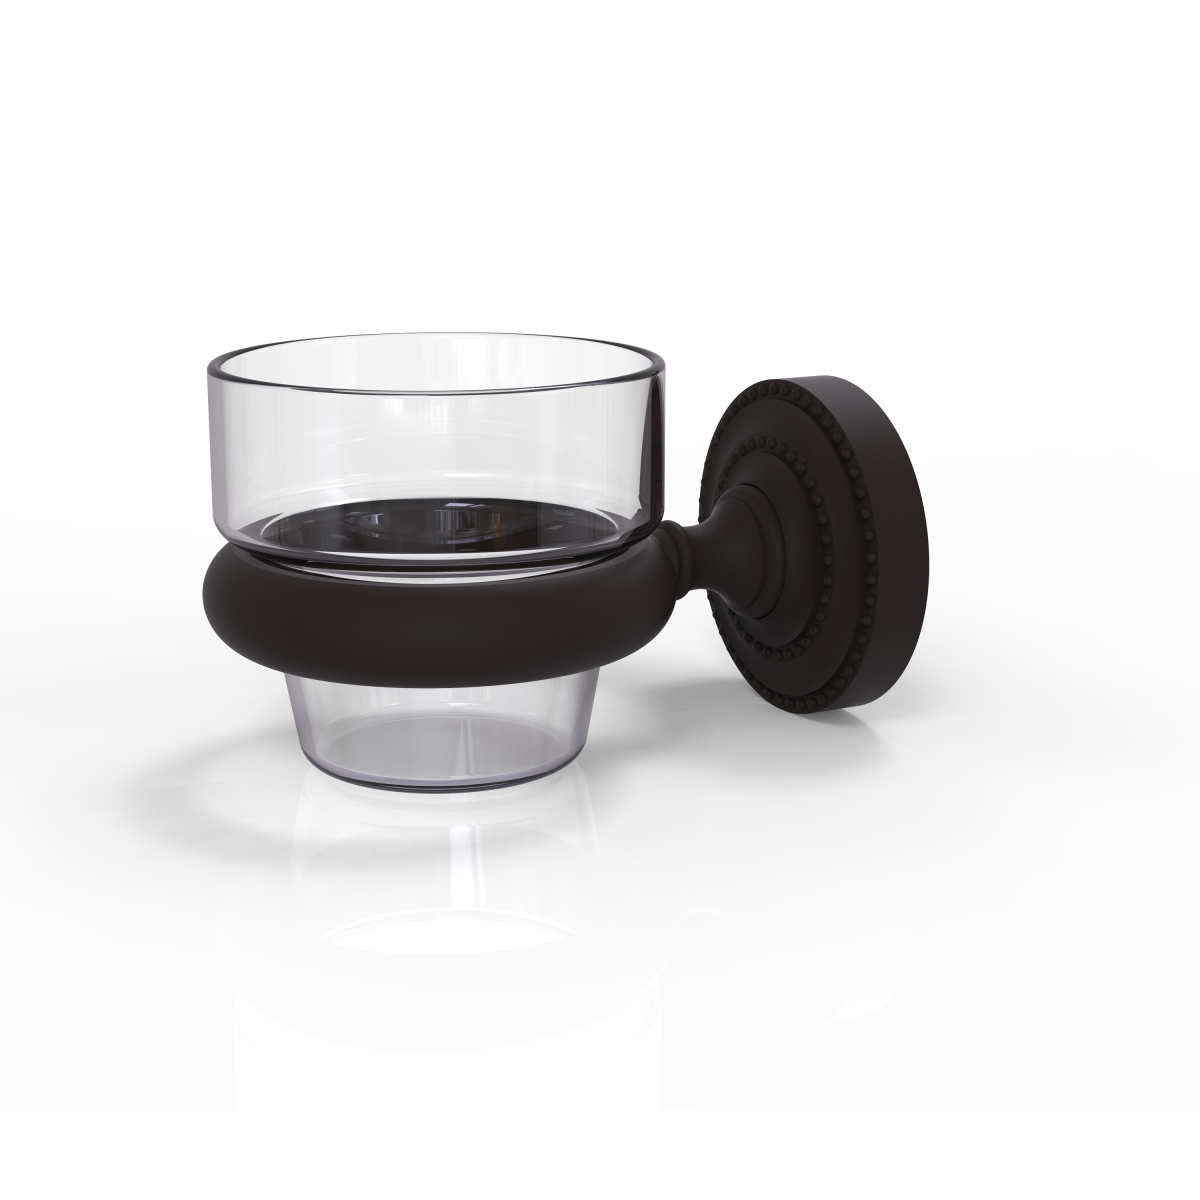 Dt-64-orb Dottingham Collection Wall Mounted Votive Candle Holder, Oil Rubbed Bronze